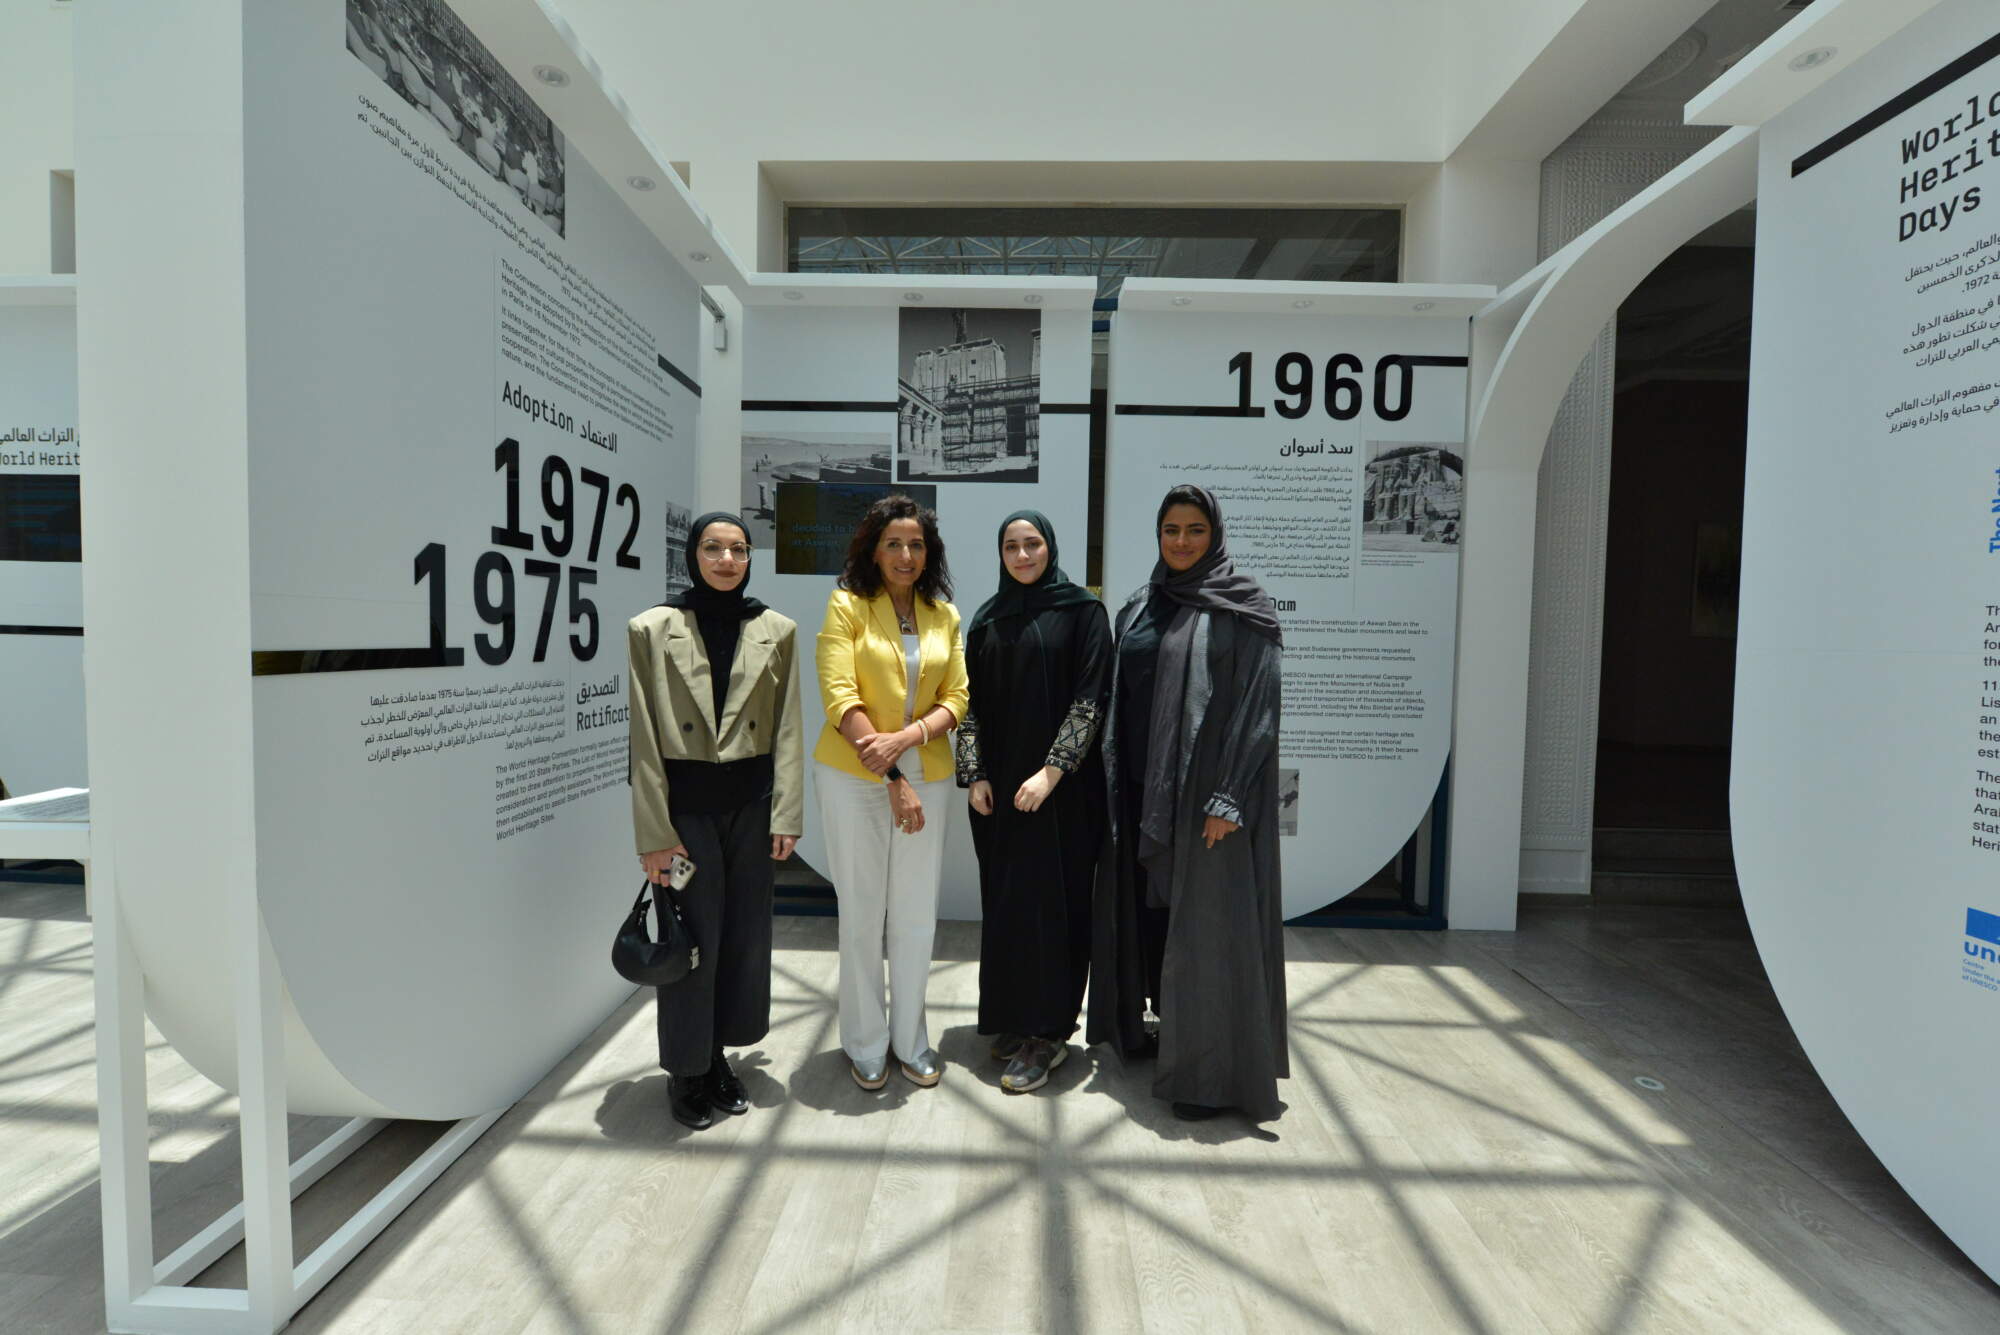 Arab Regional Centre for World Heritage welcomes two students selected to attend the International Summer School for Youth and Heritage